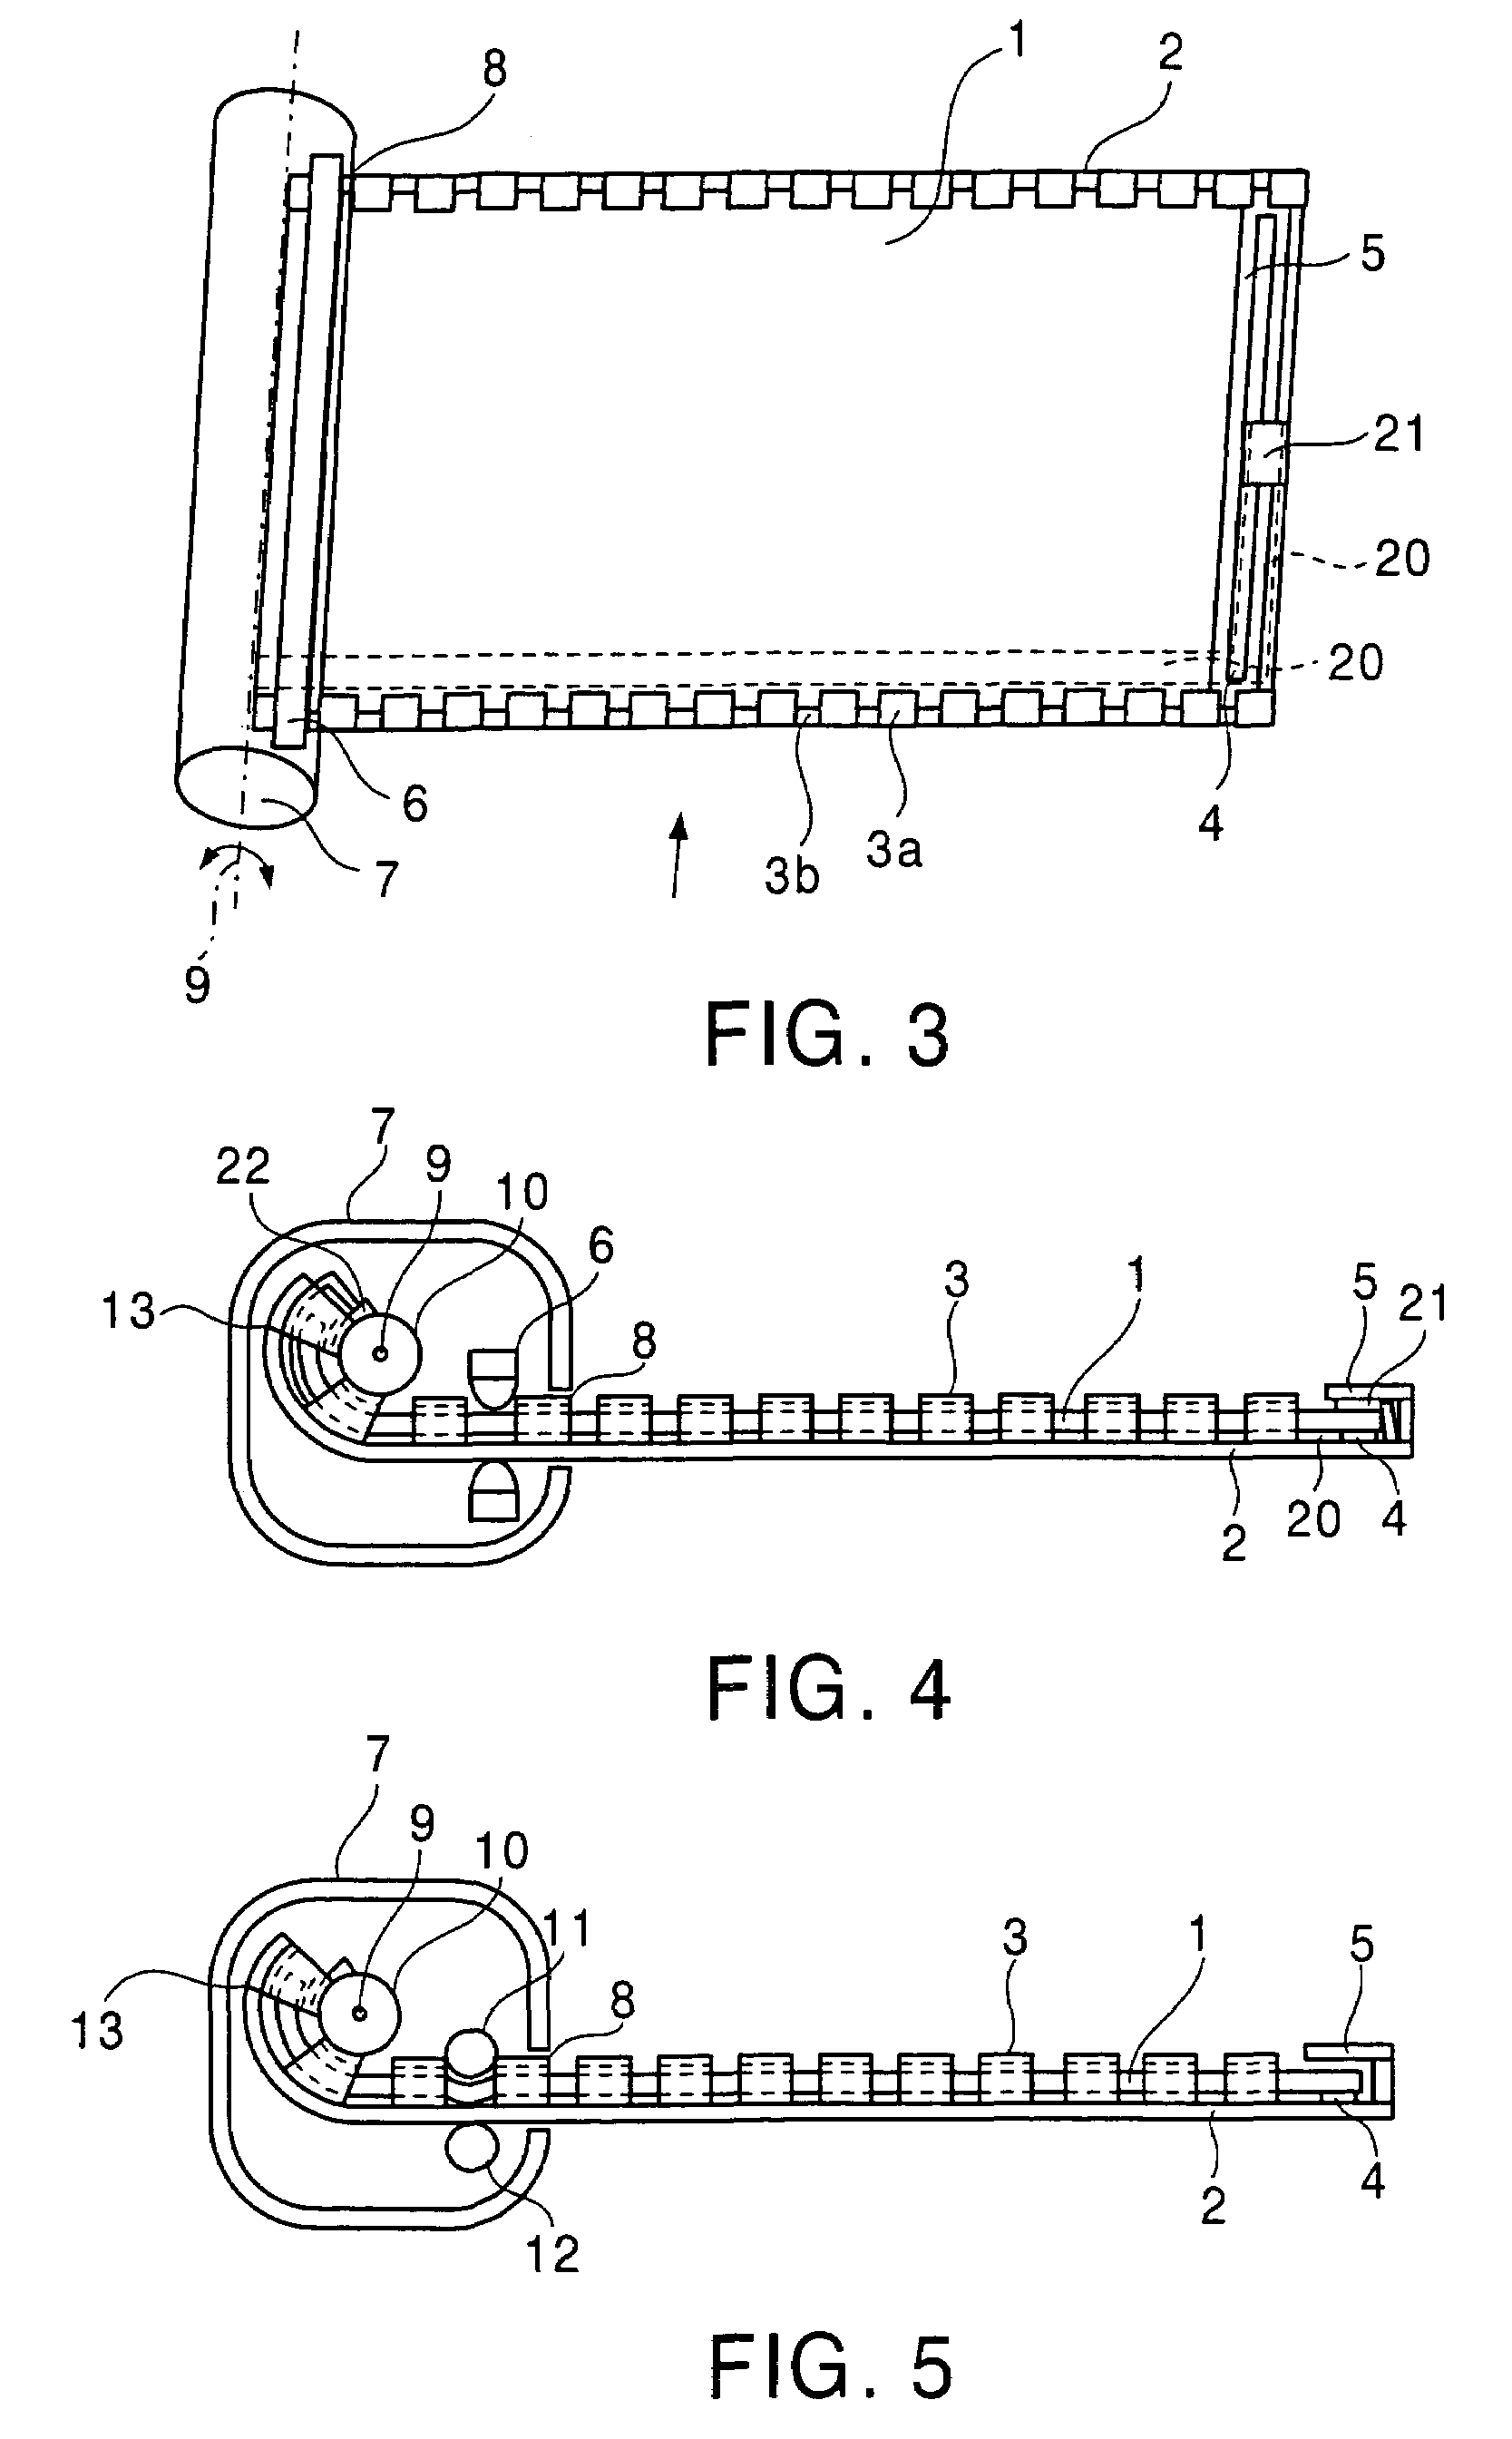 Display device having flexibility and a winding axis that winds the two slidable plates